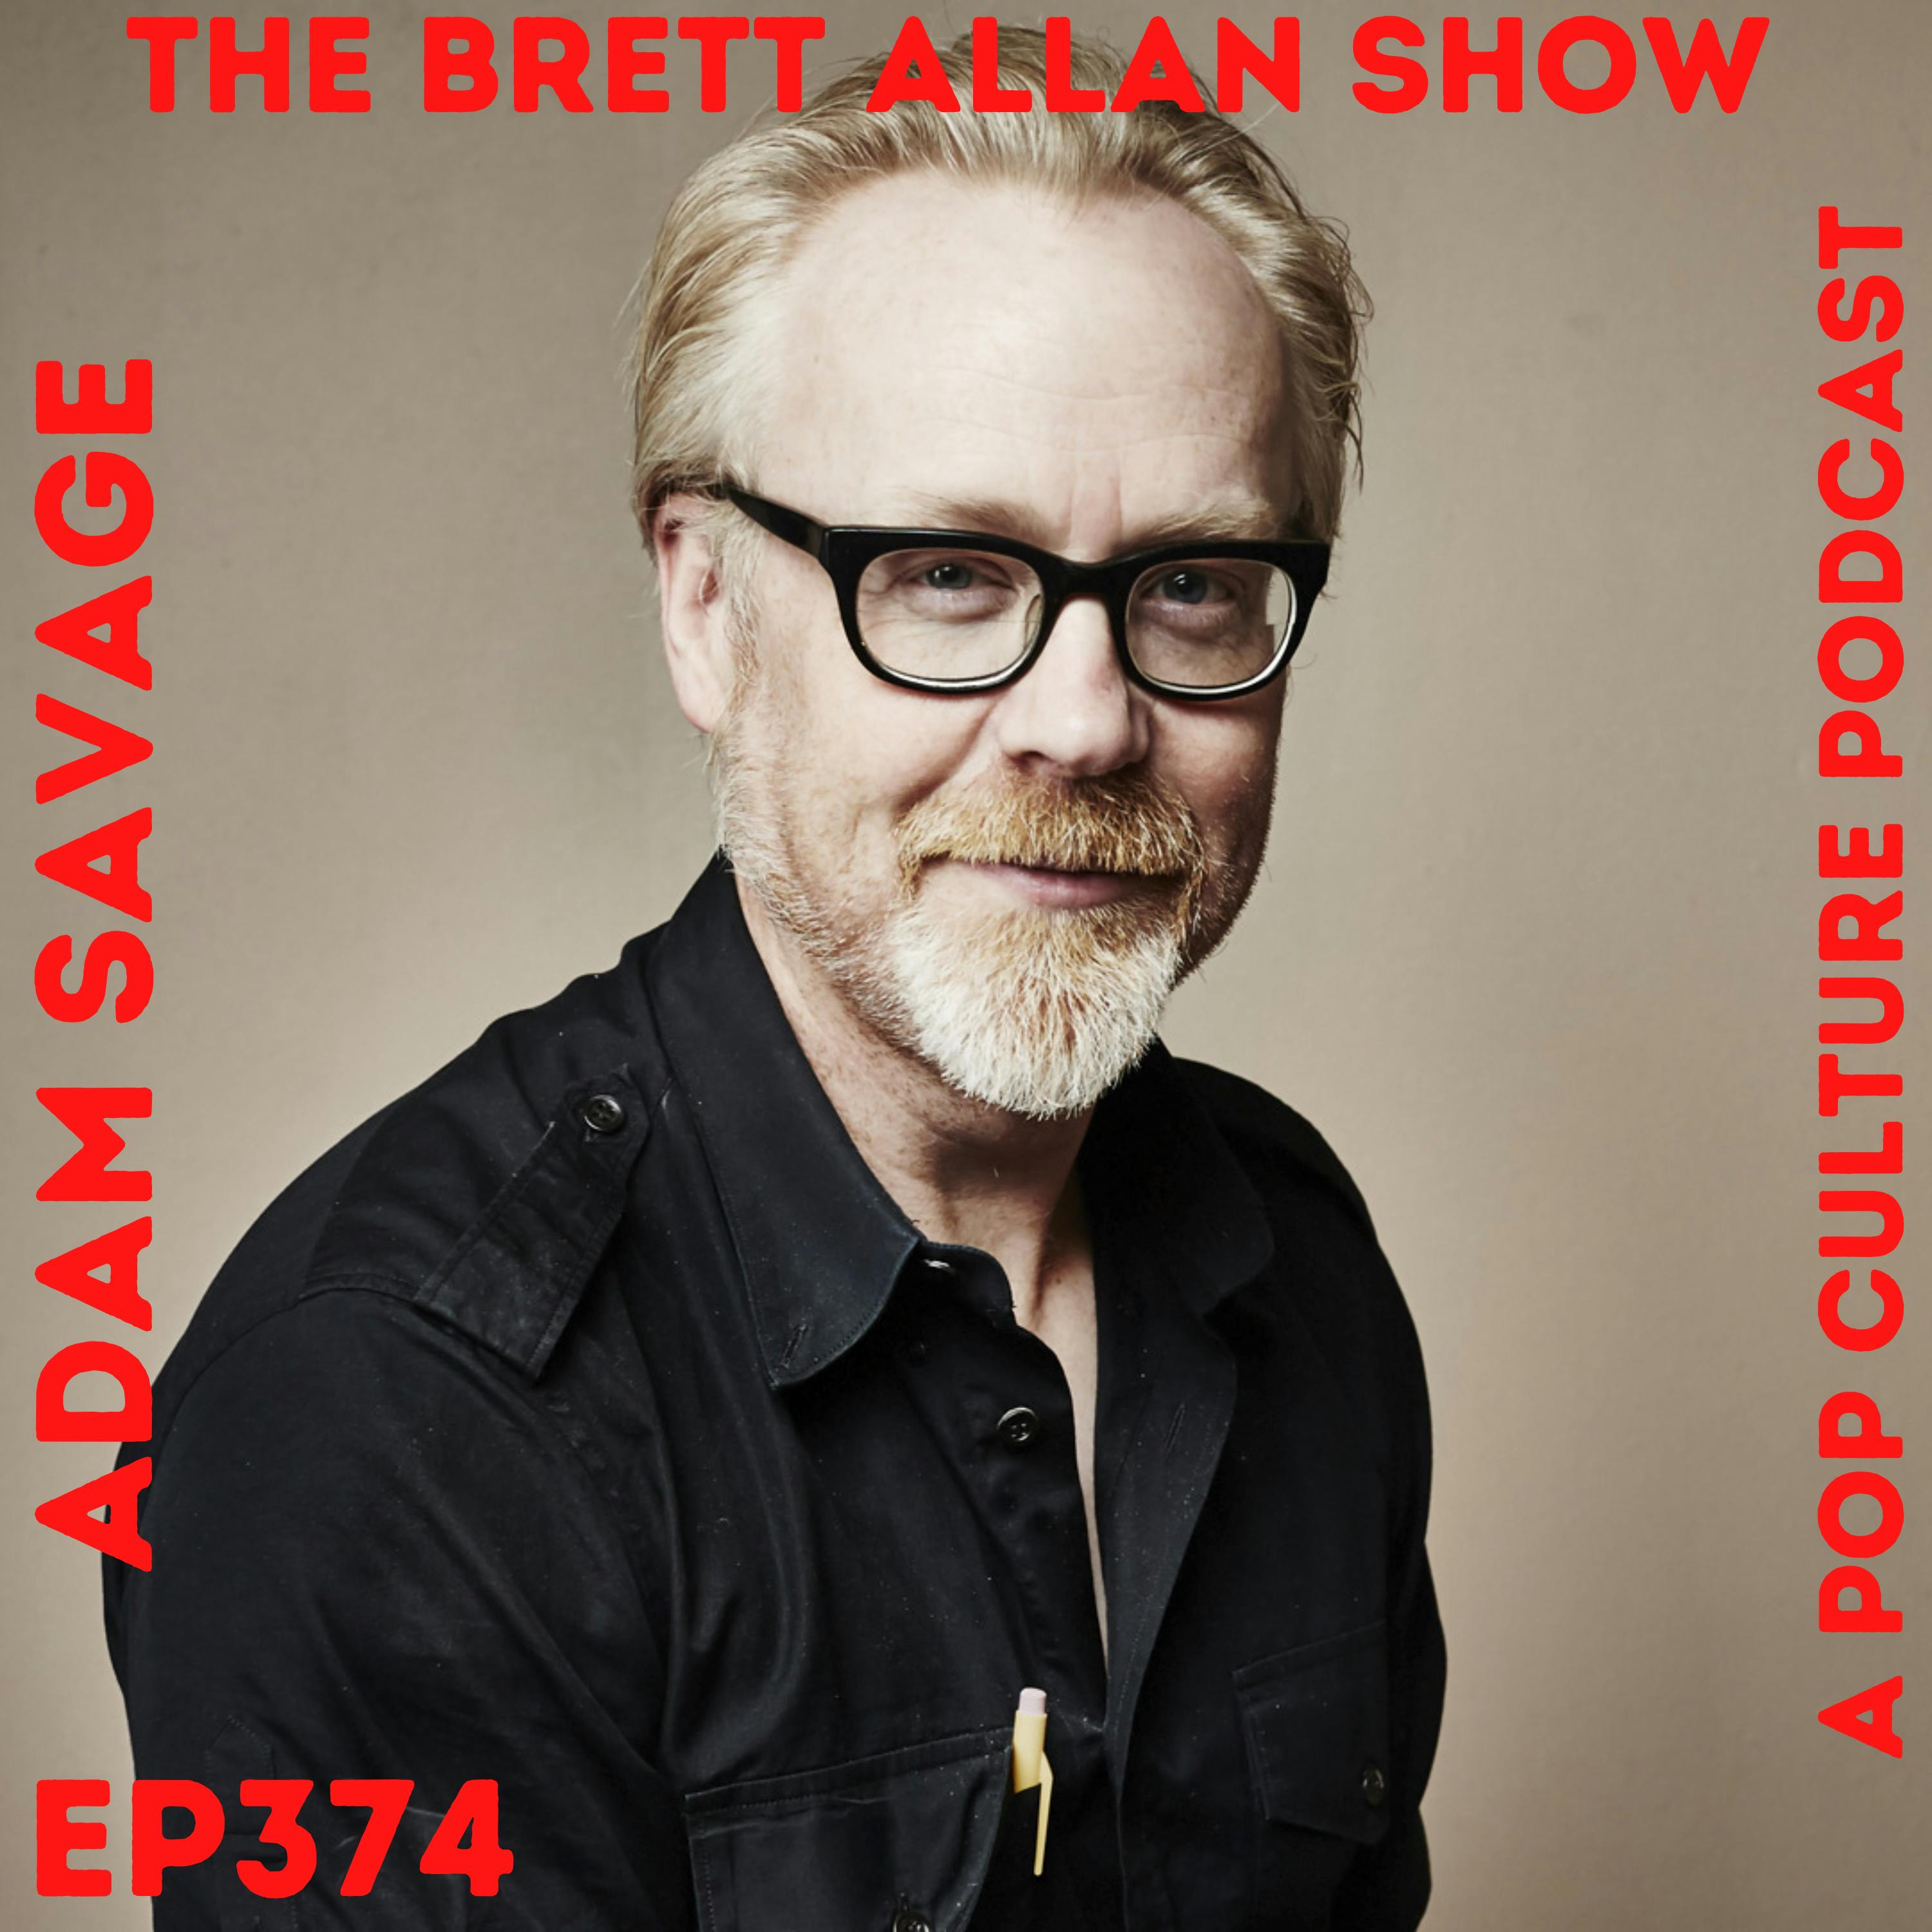 Adam Savage Talks "SILICON" August 27-28, 2022 At The San Jose McEnery Convention Center and More